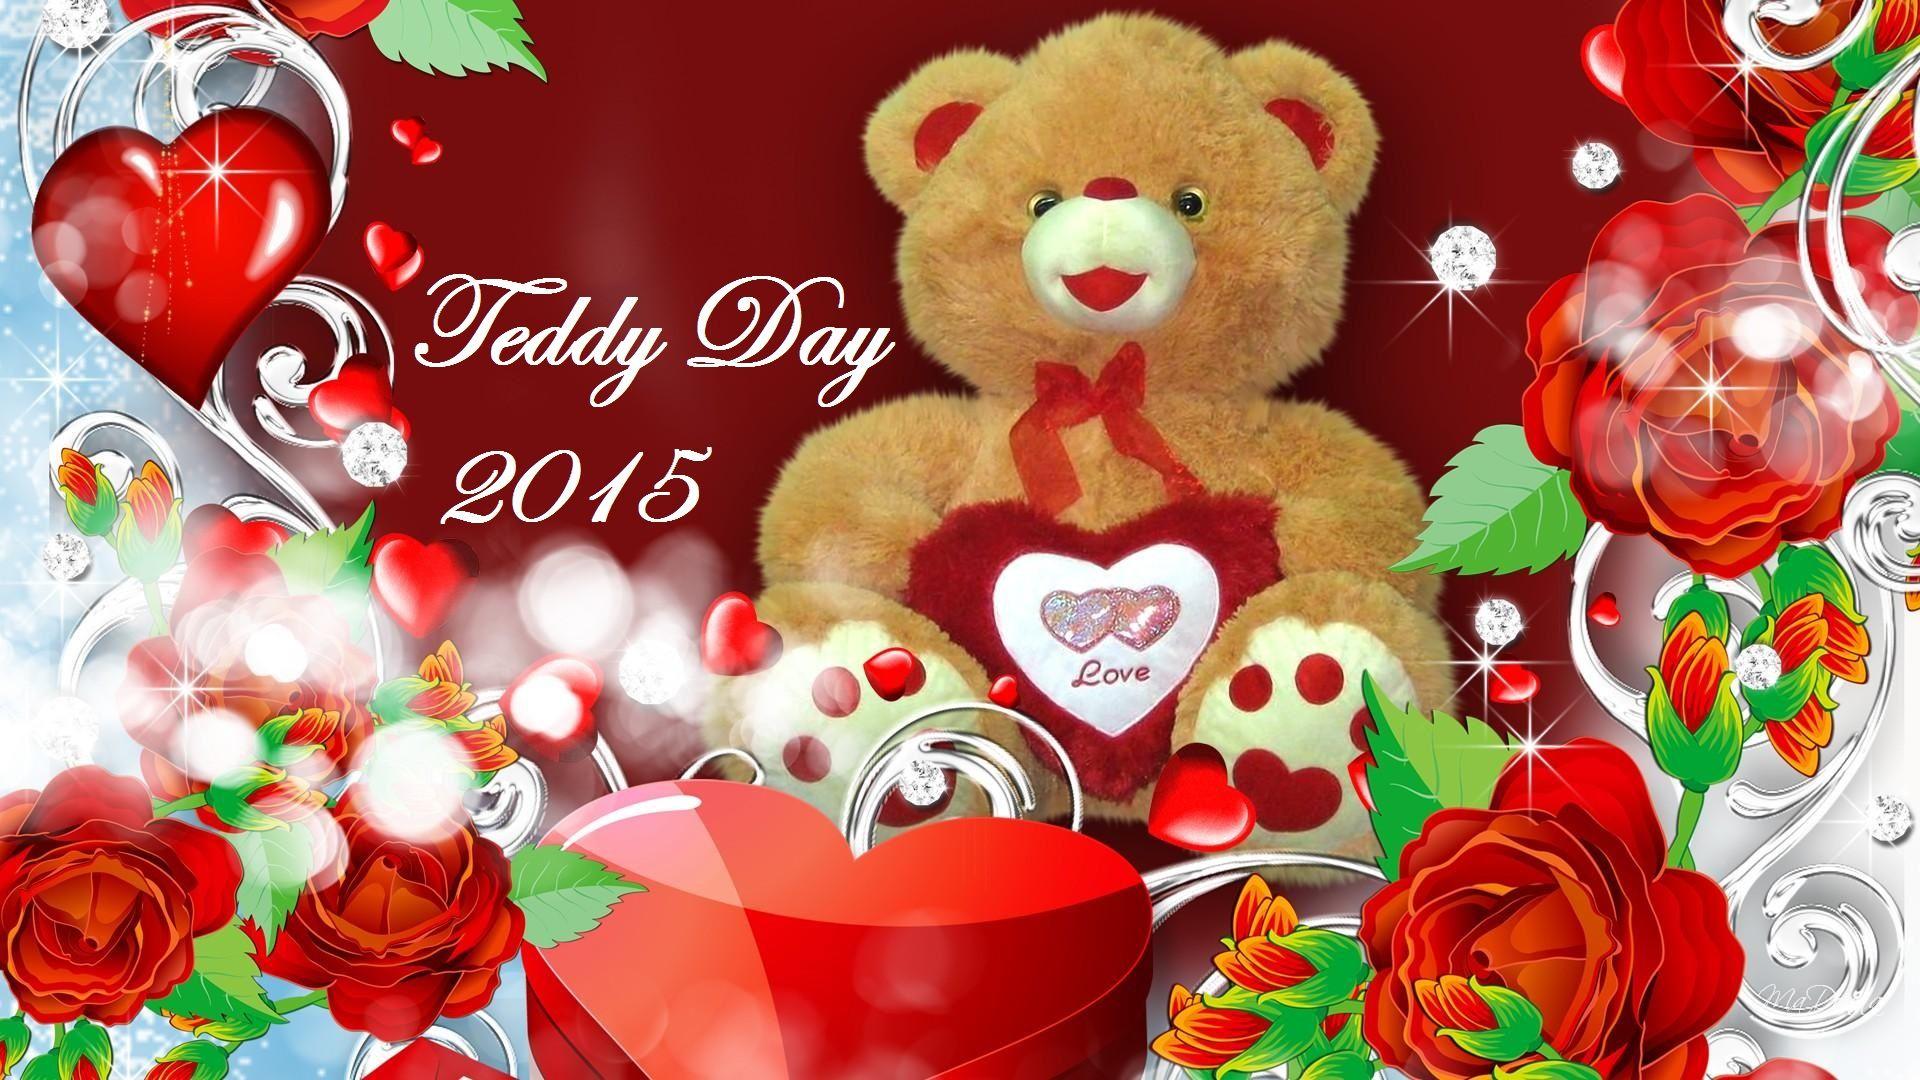 Teddy Day SMS HD Wallpaper Quotes Image Wishes Status. Happy